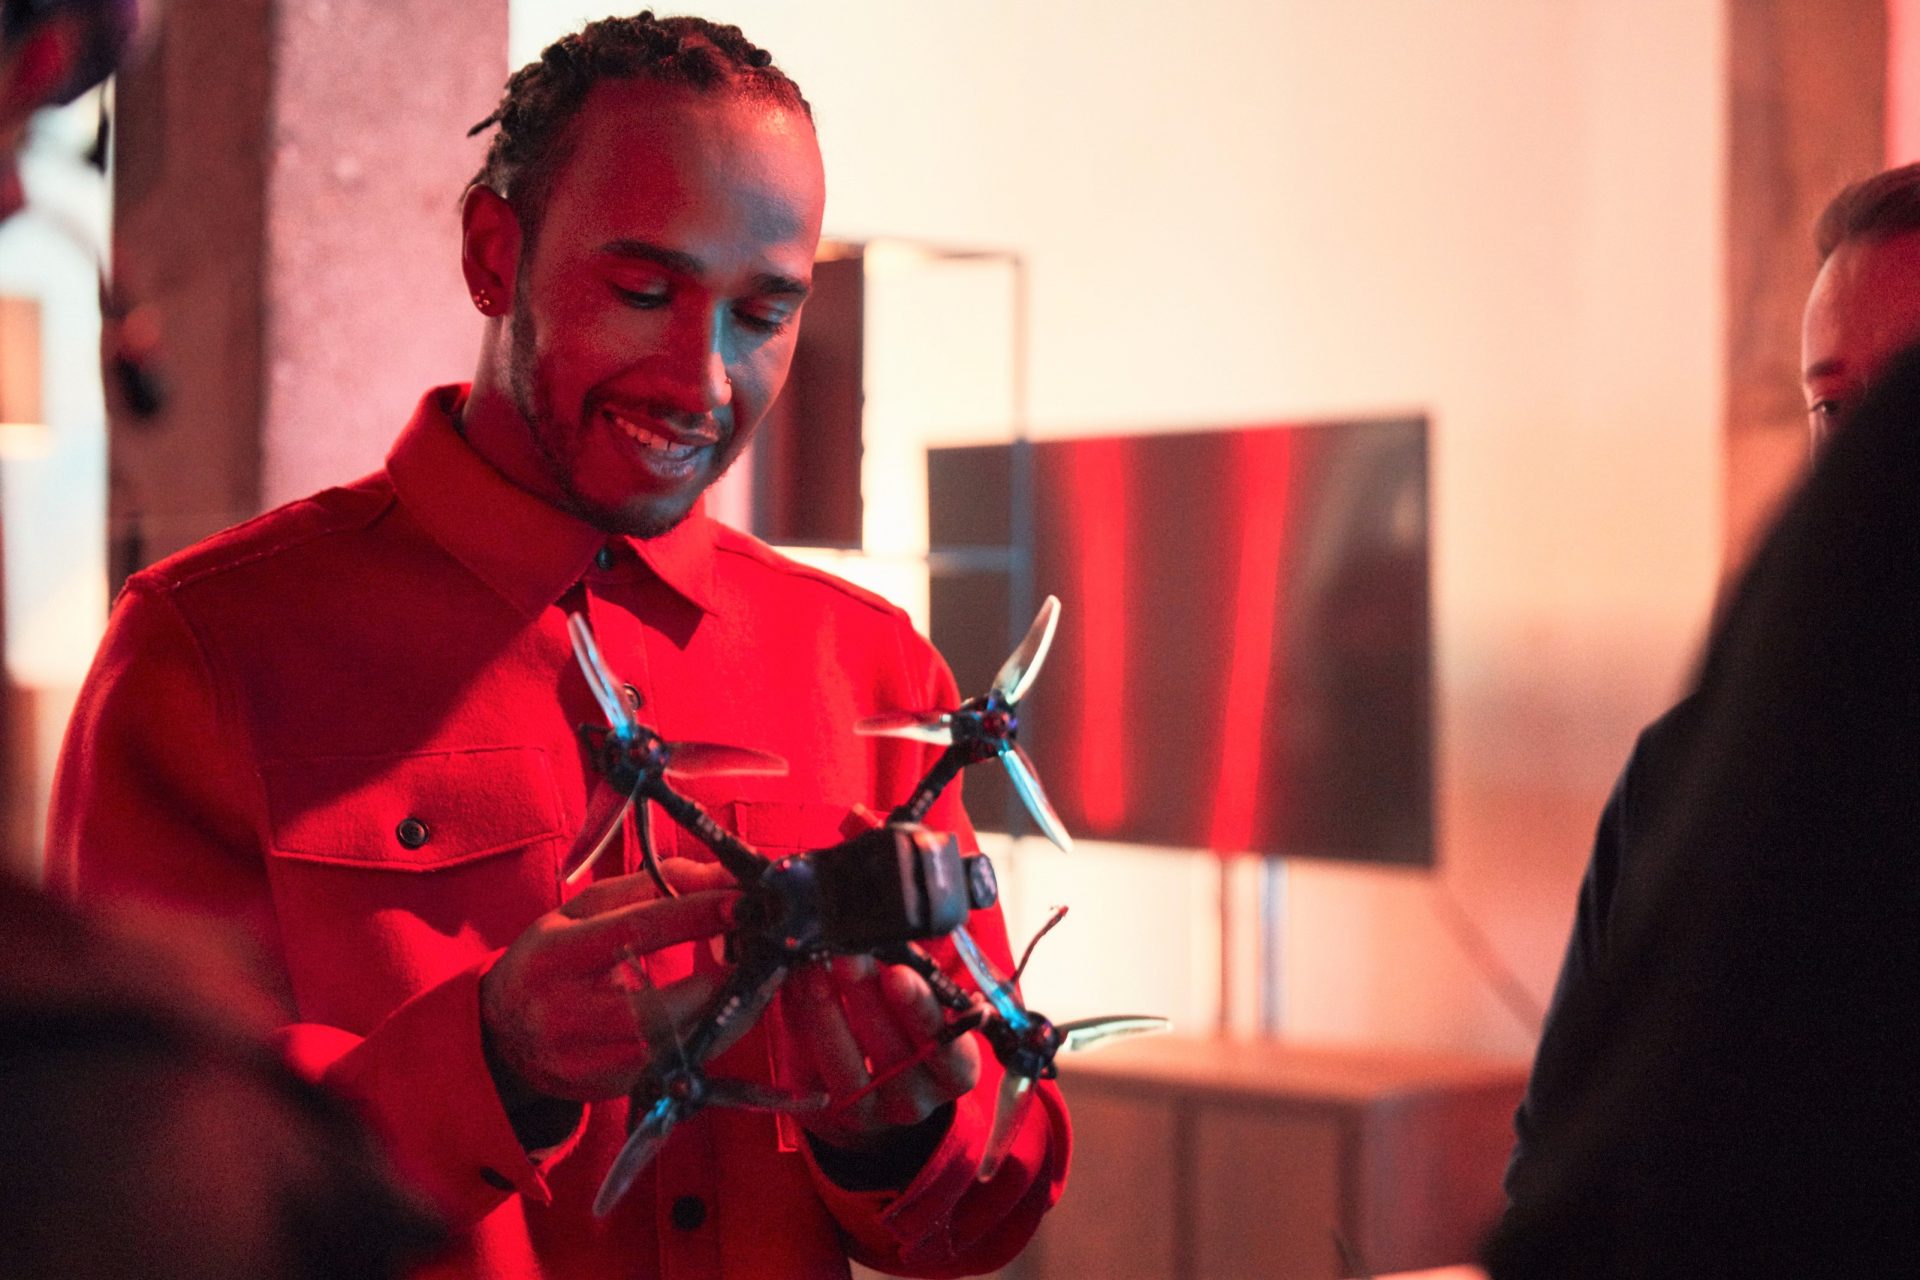 Lewis Hamilton smiling while inspecting a racing drone